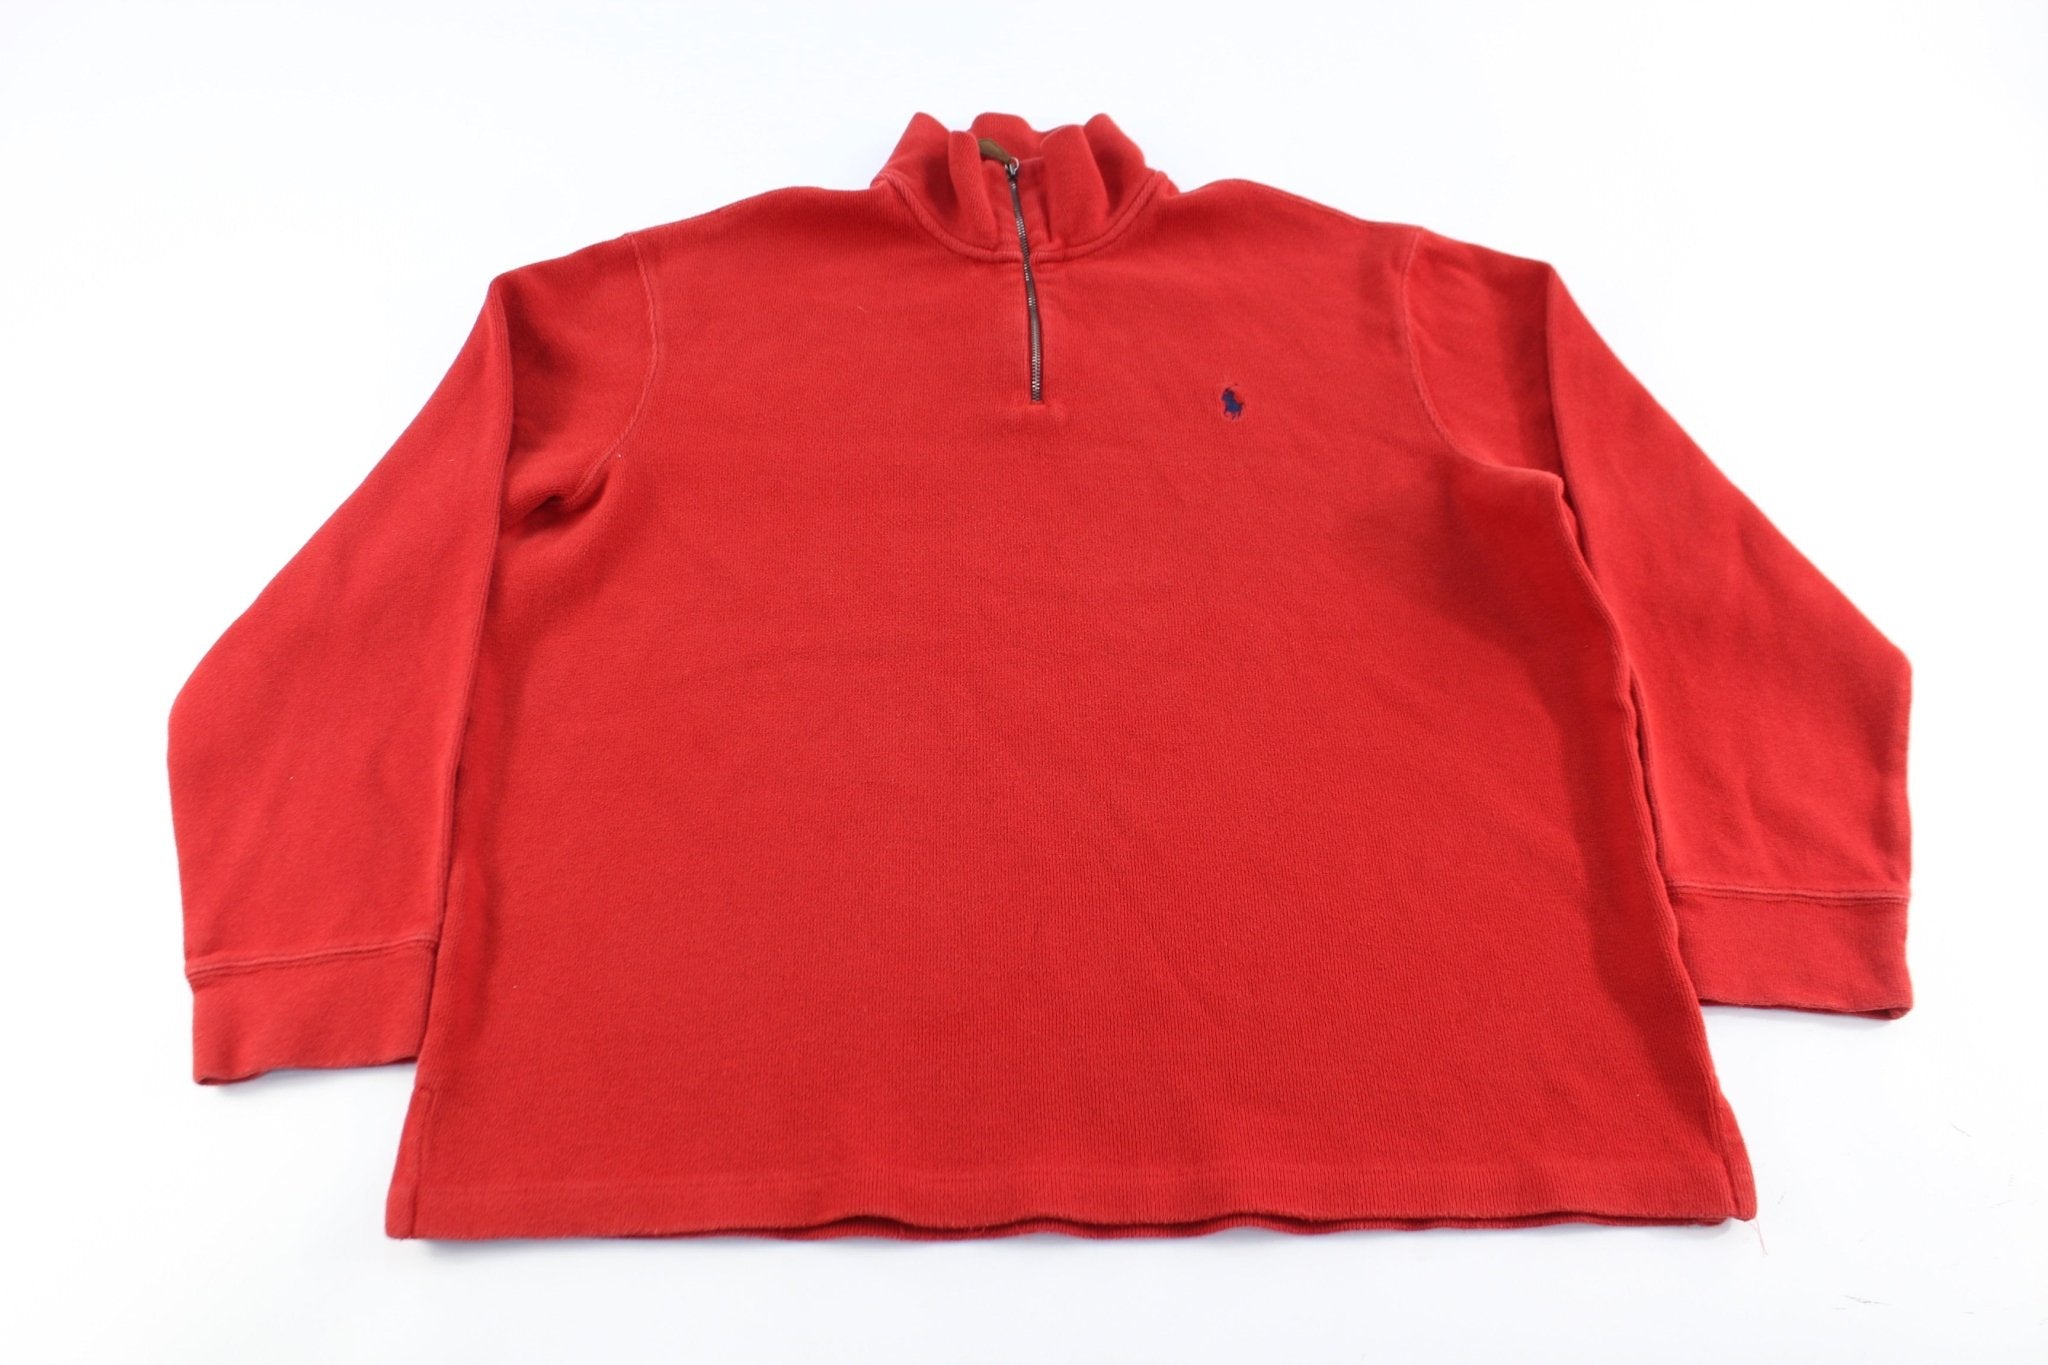 Polo by Ralph Lauren Embroidered Logo Burnt Orange Sweater